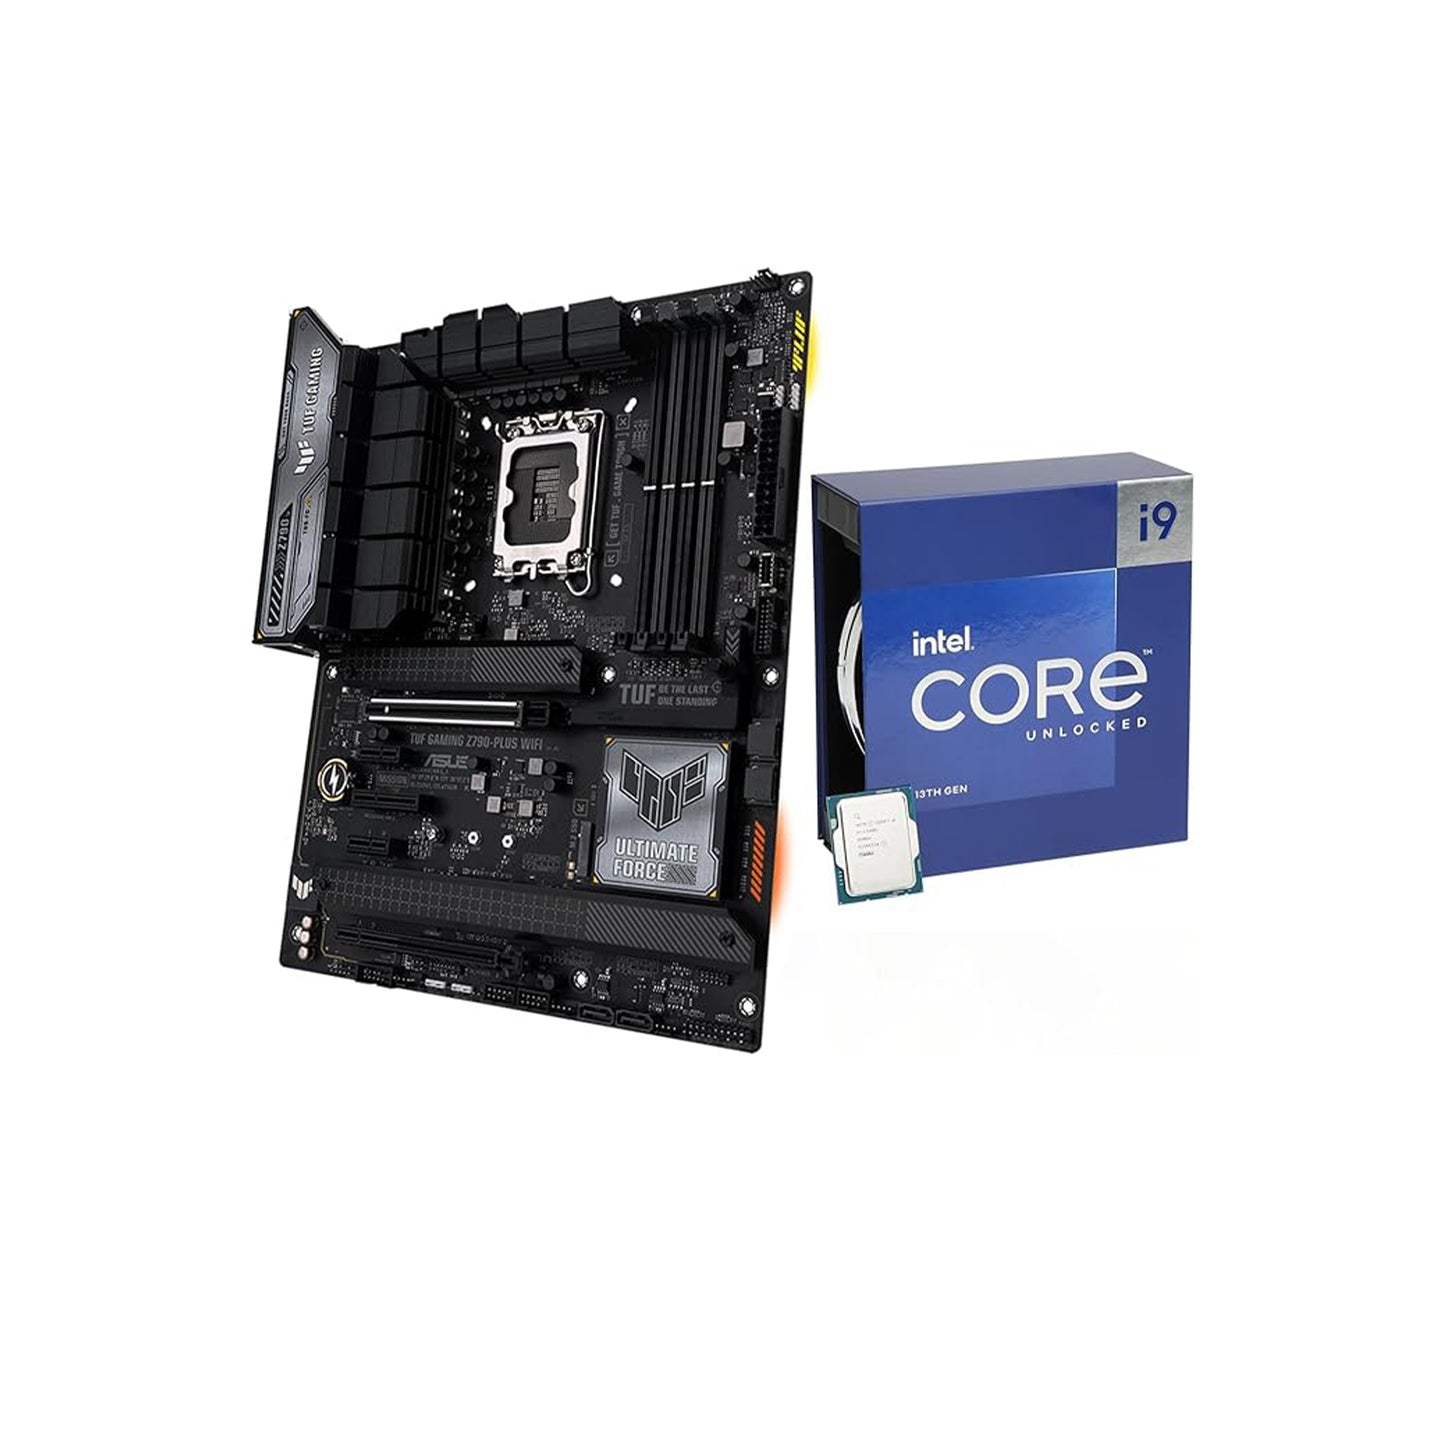 INLAND Micro Center Intel Core i9-13900K Desktop Processor 24 Cores up to 5.8 GHz Unlocked with ASUS ROG Strix Z790-F WiFi DDR5 LGA 1700 ATX Gaming Motherboard